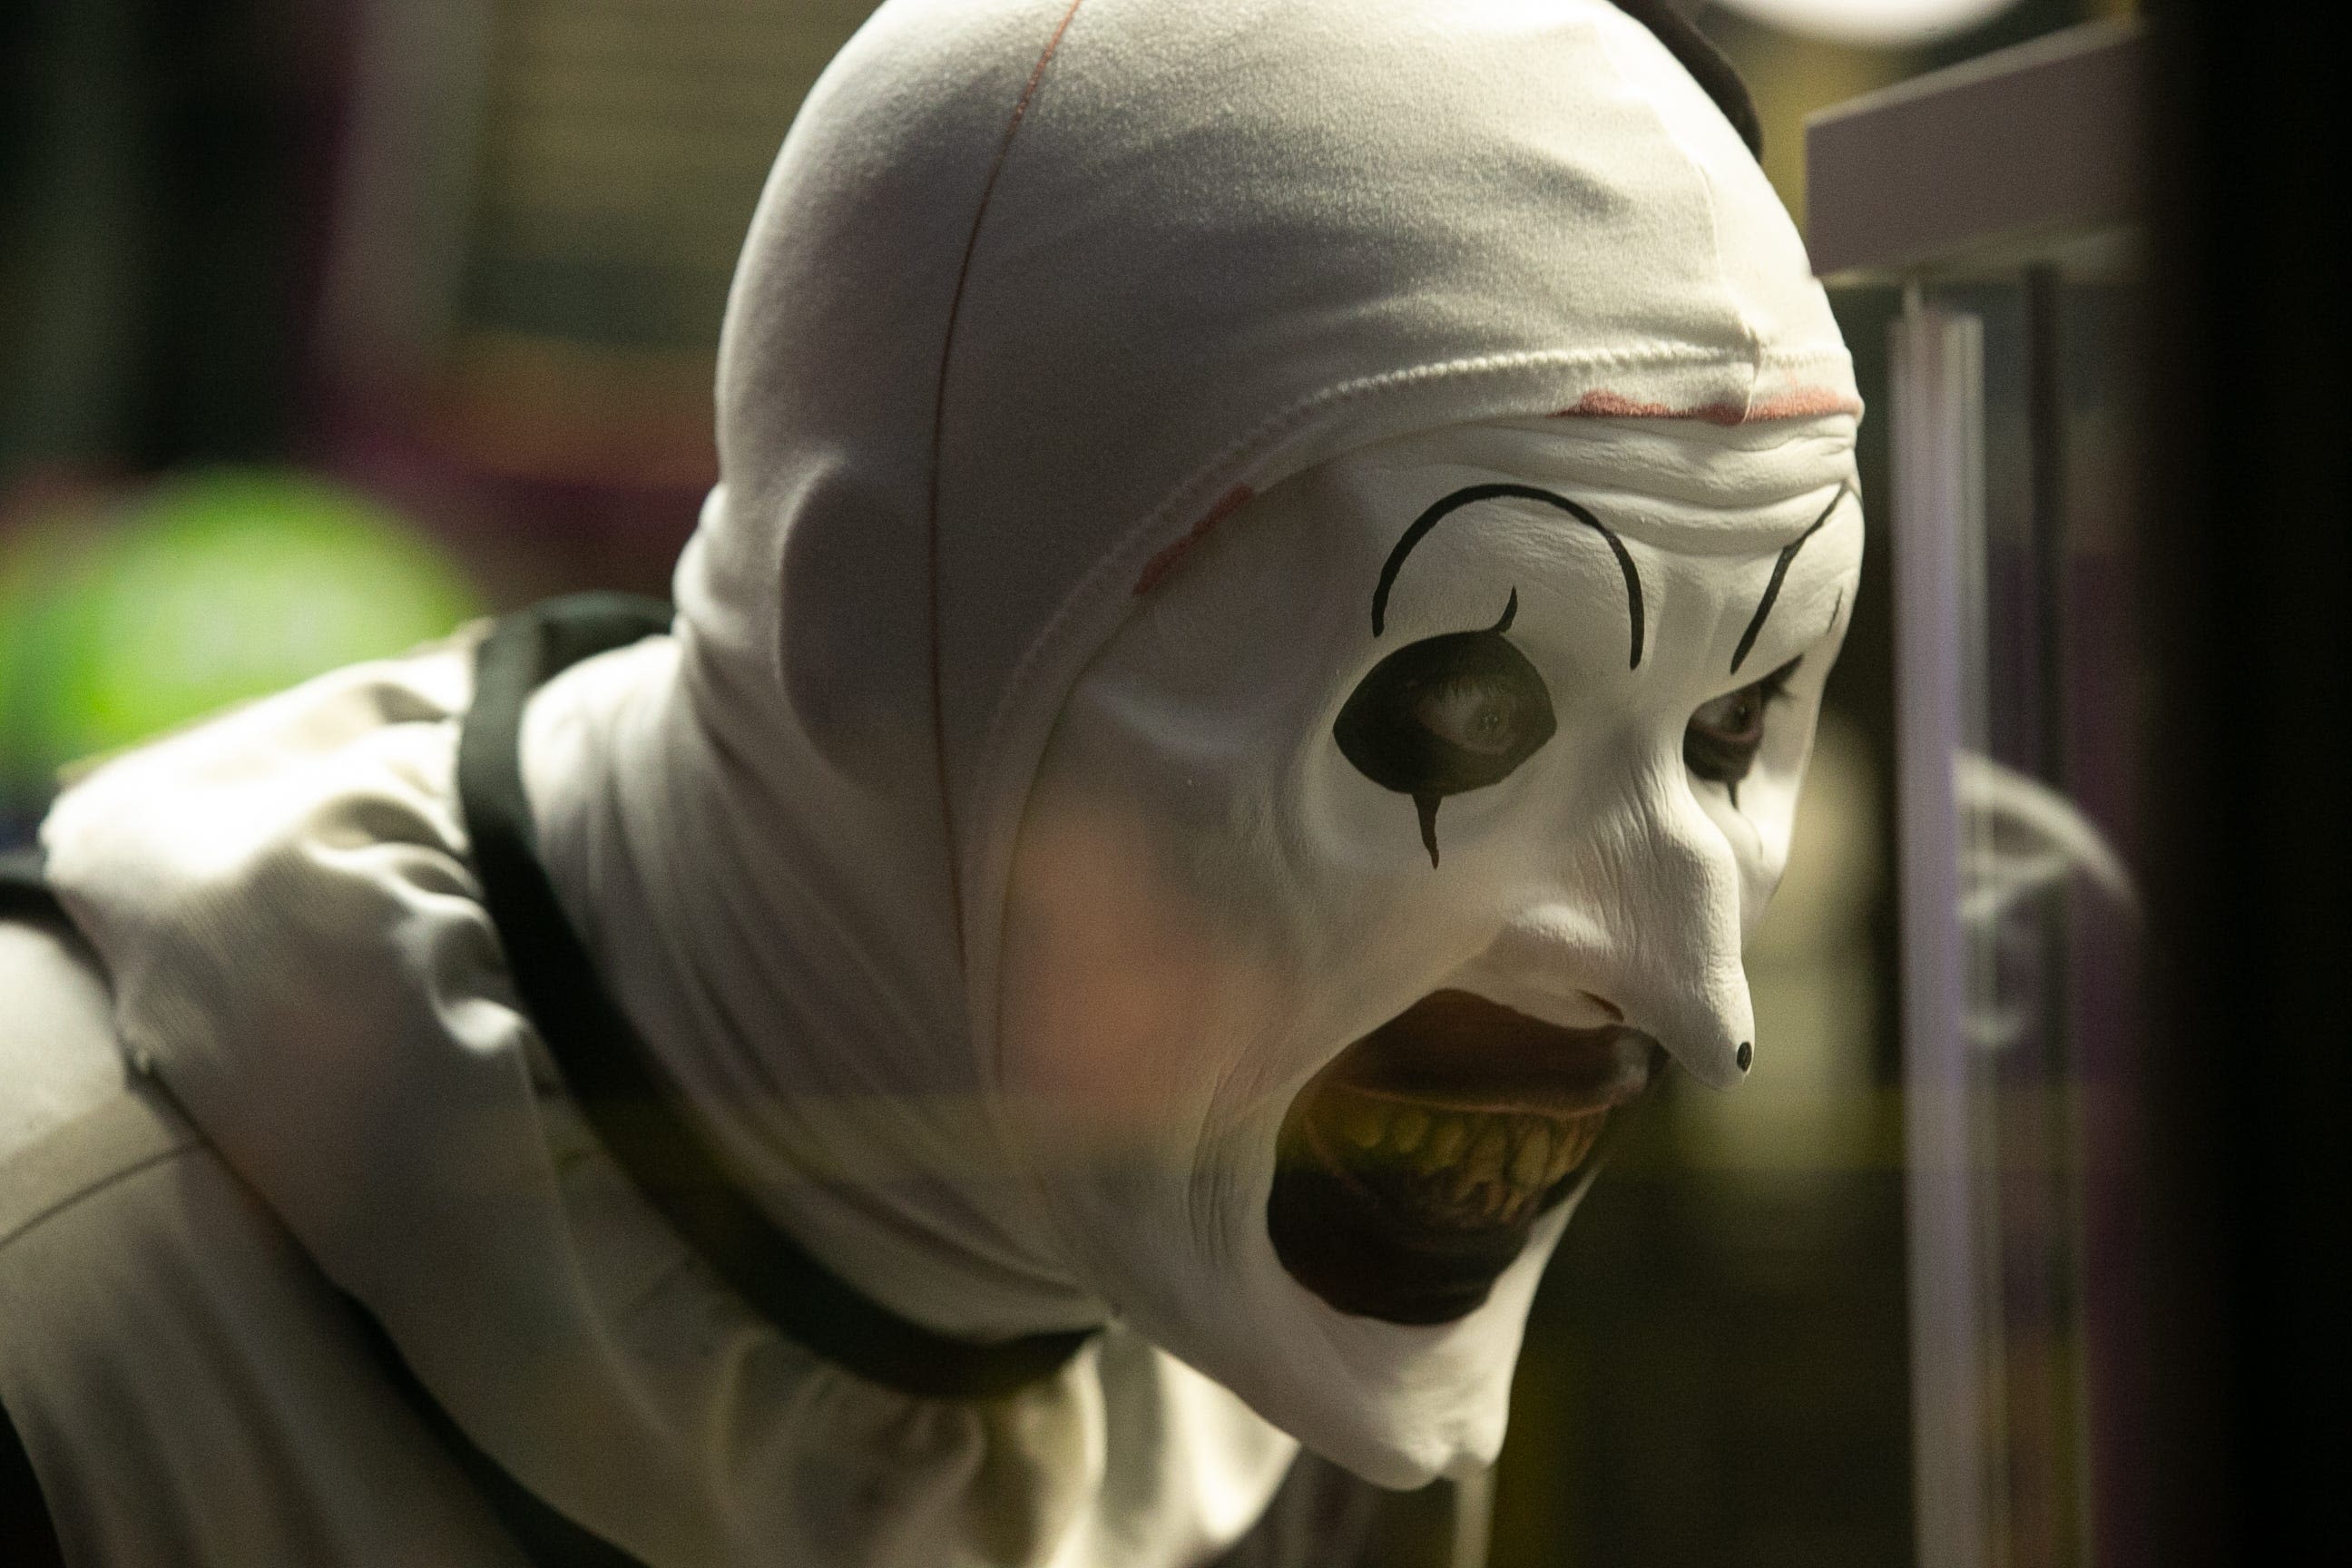 Art the Clown set to return in 'Terrifier 3' this October: 'I don't want people fainting'